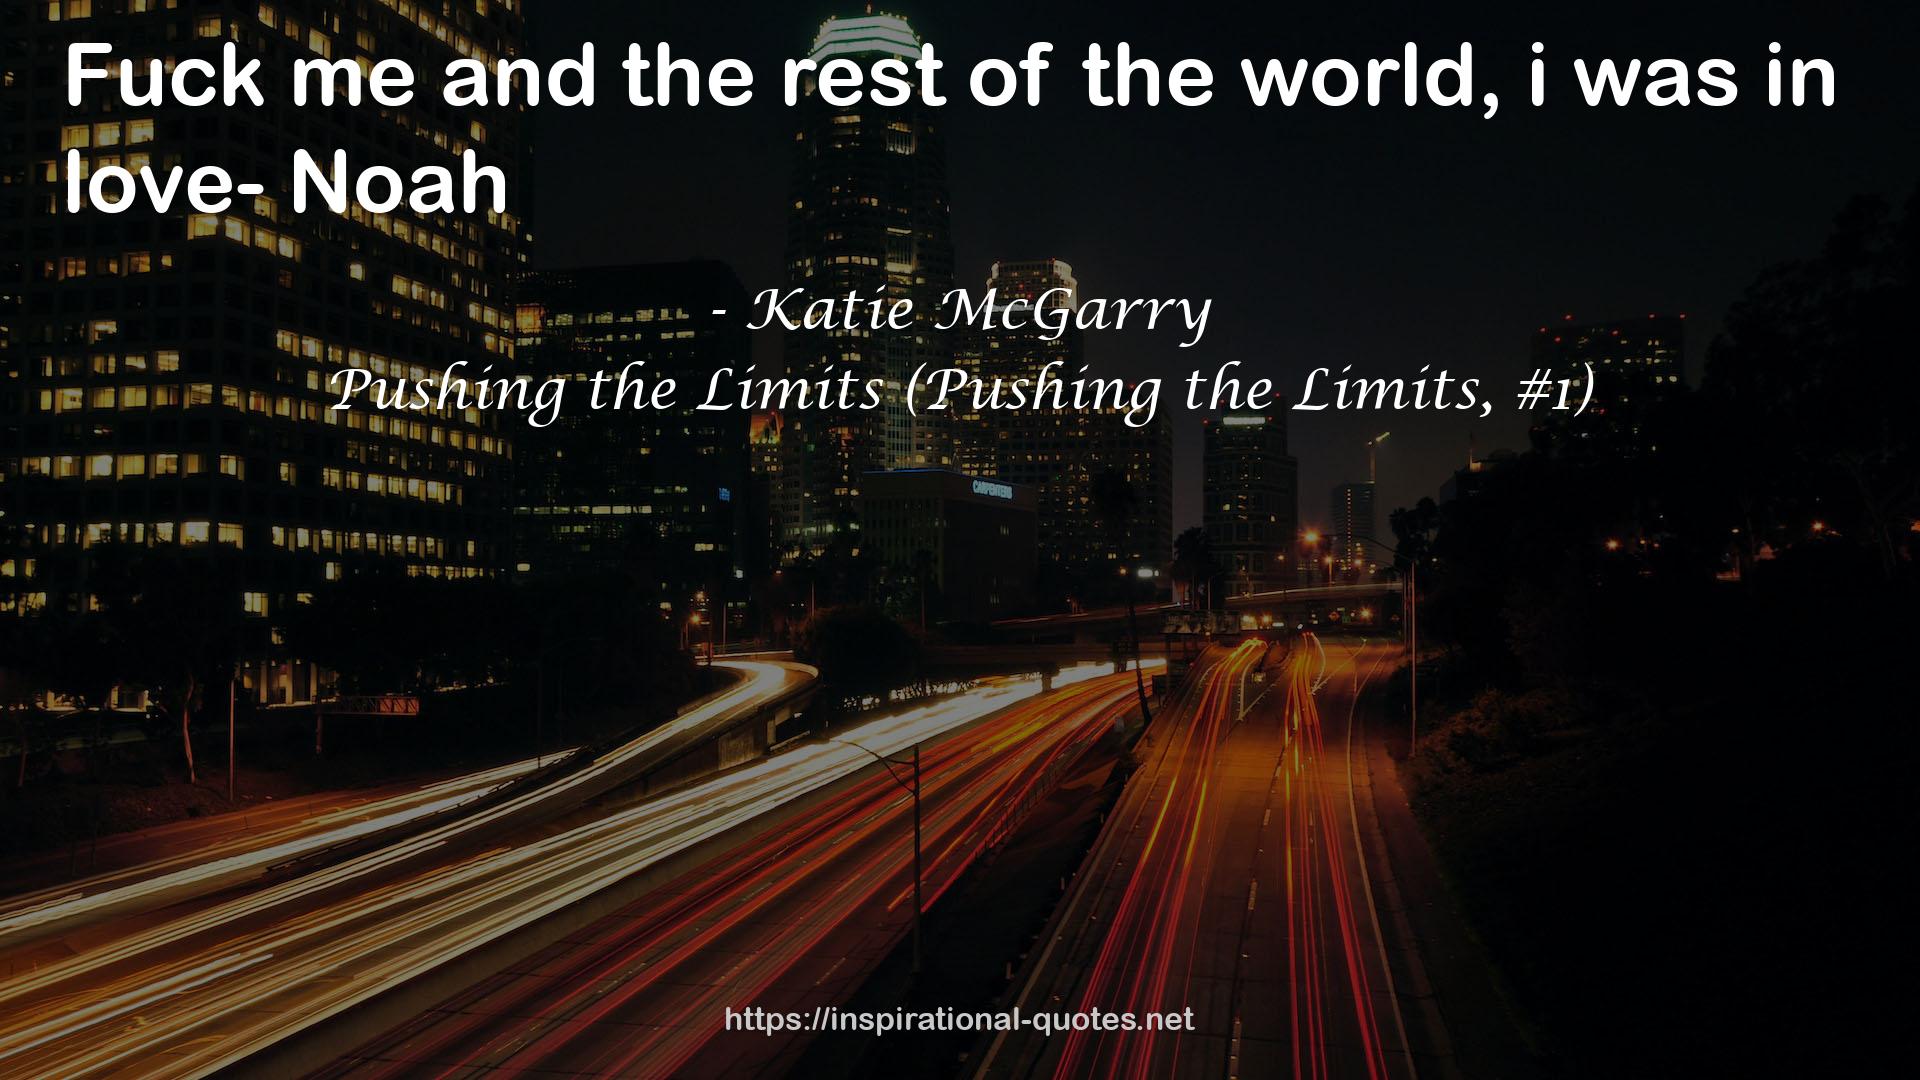 Pushing the Limits (Pushing the Limits, #1) QUOTES